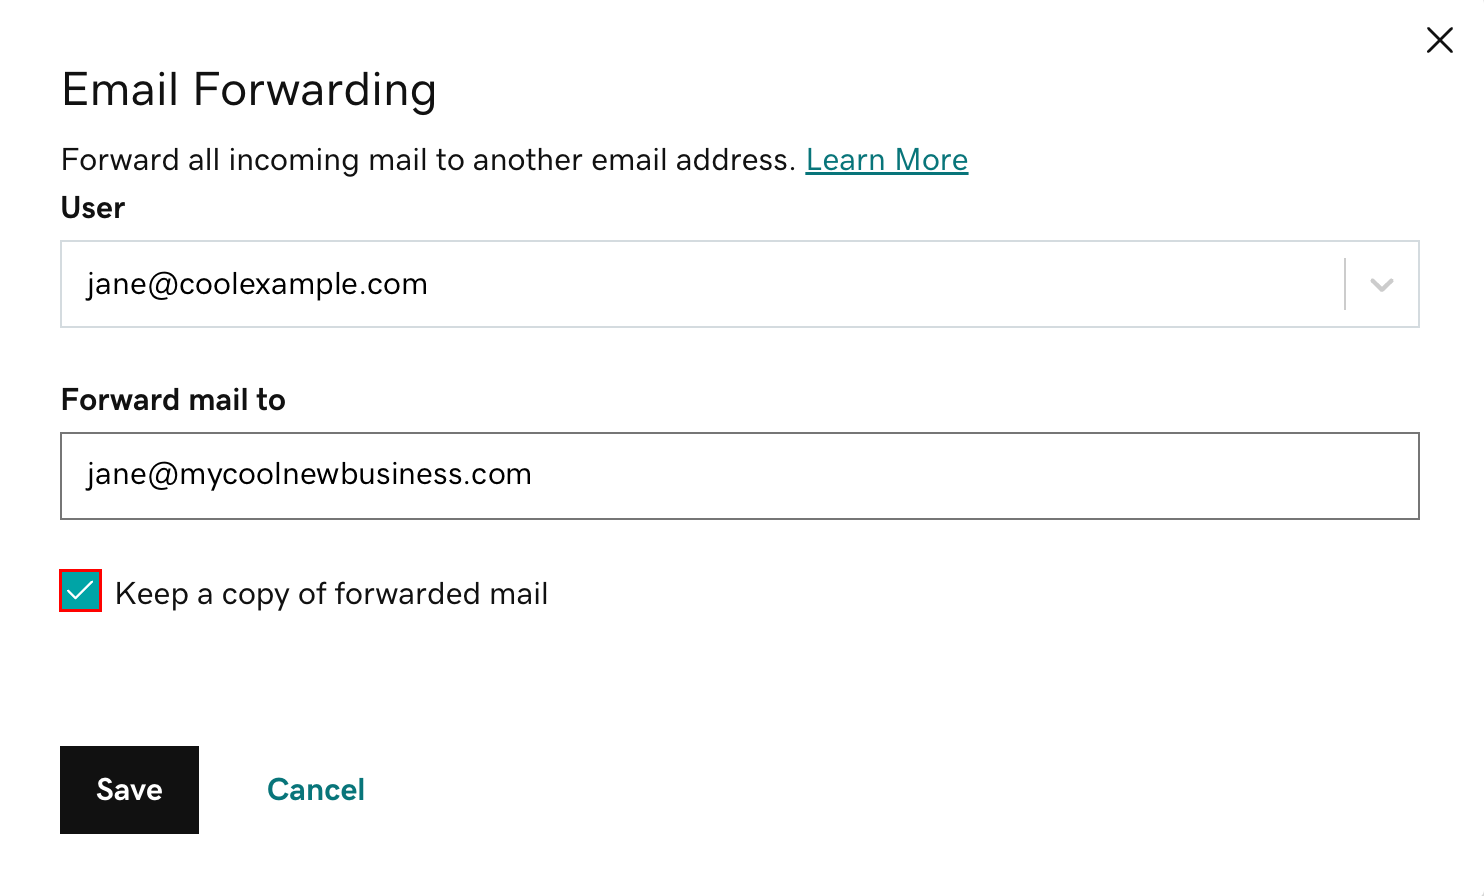 select checkbox next to keep a copy of forwarded mail